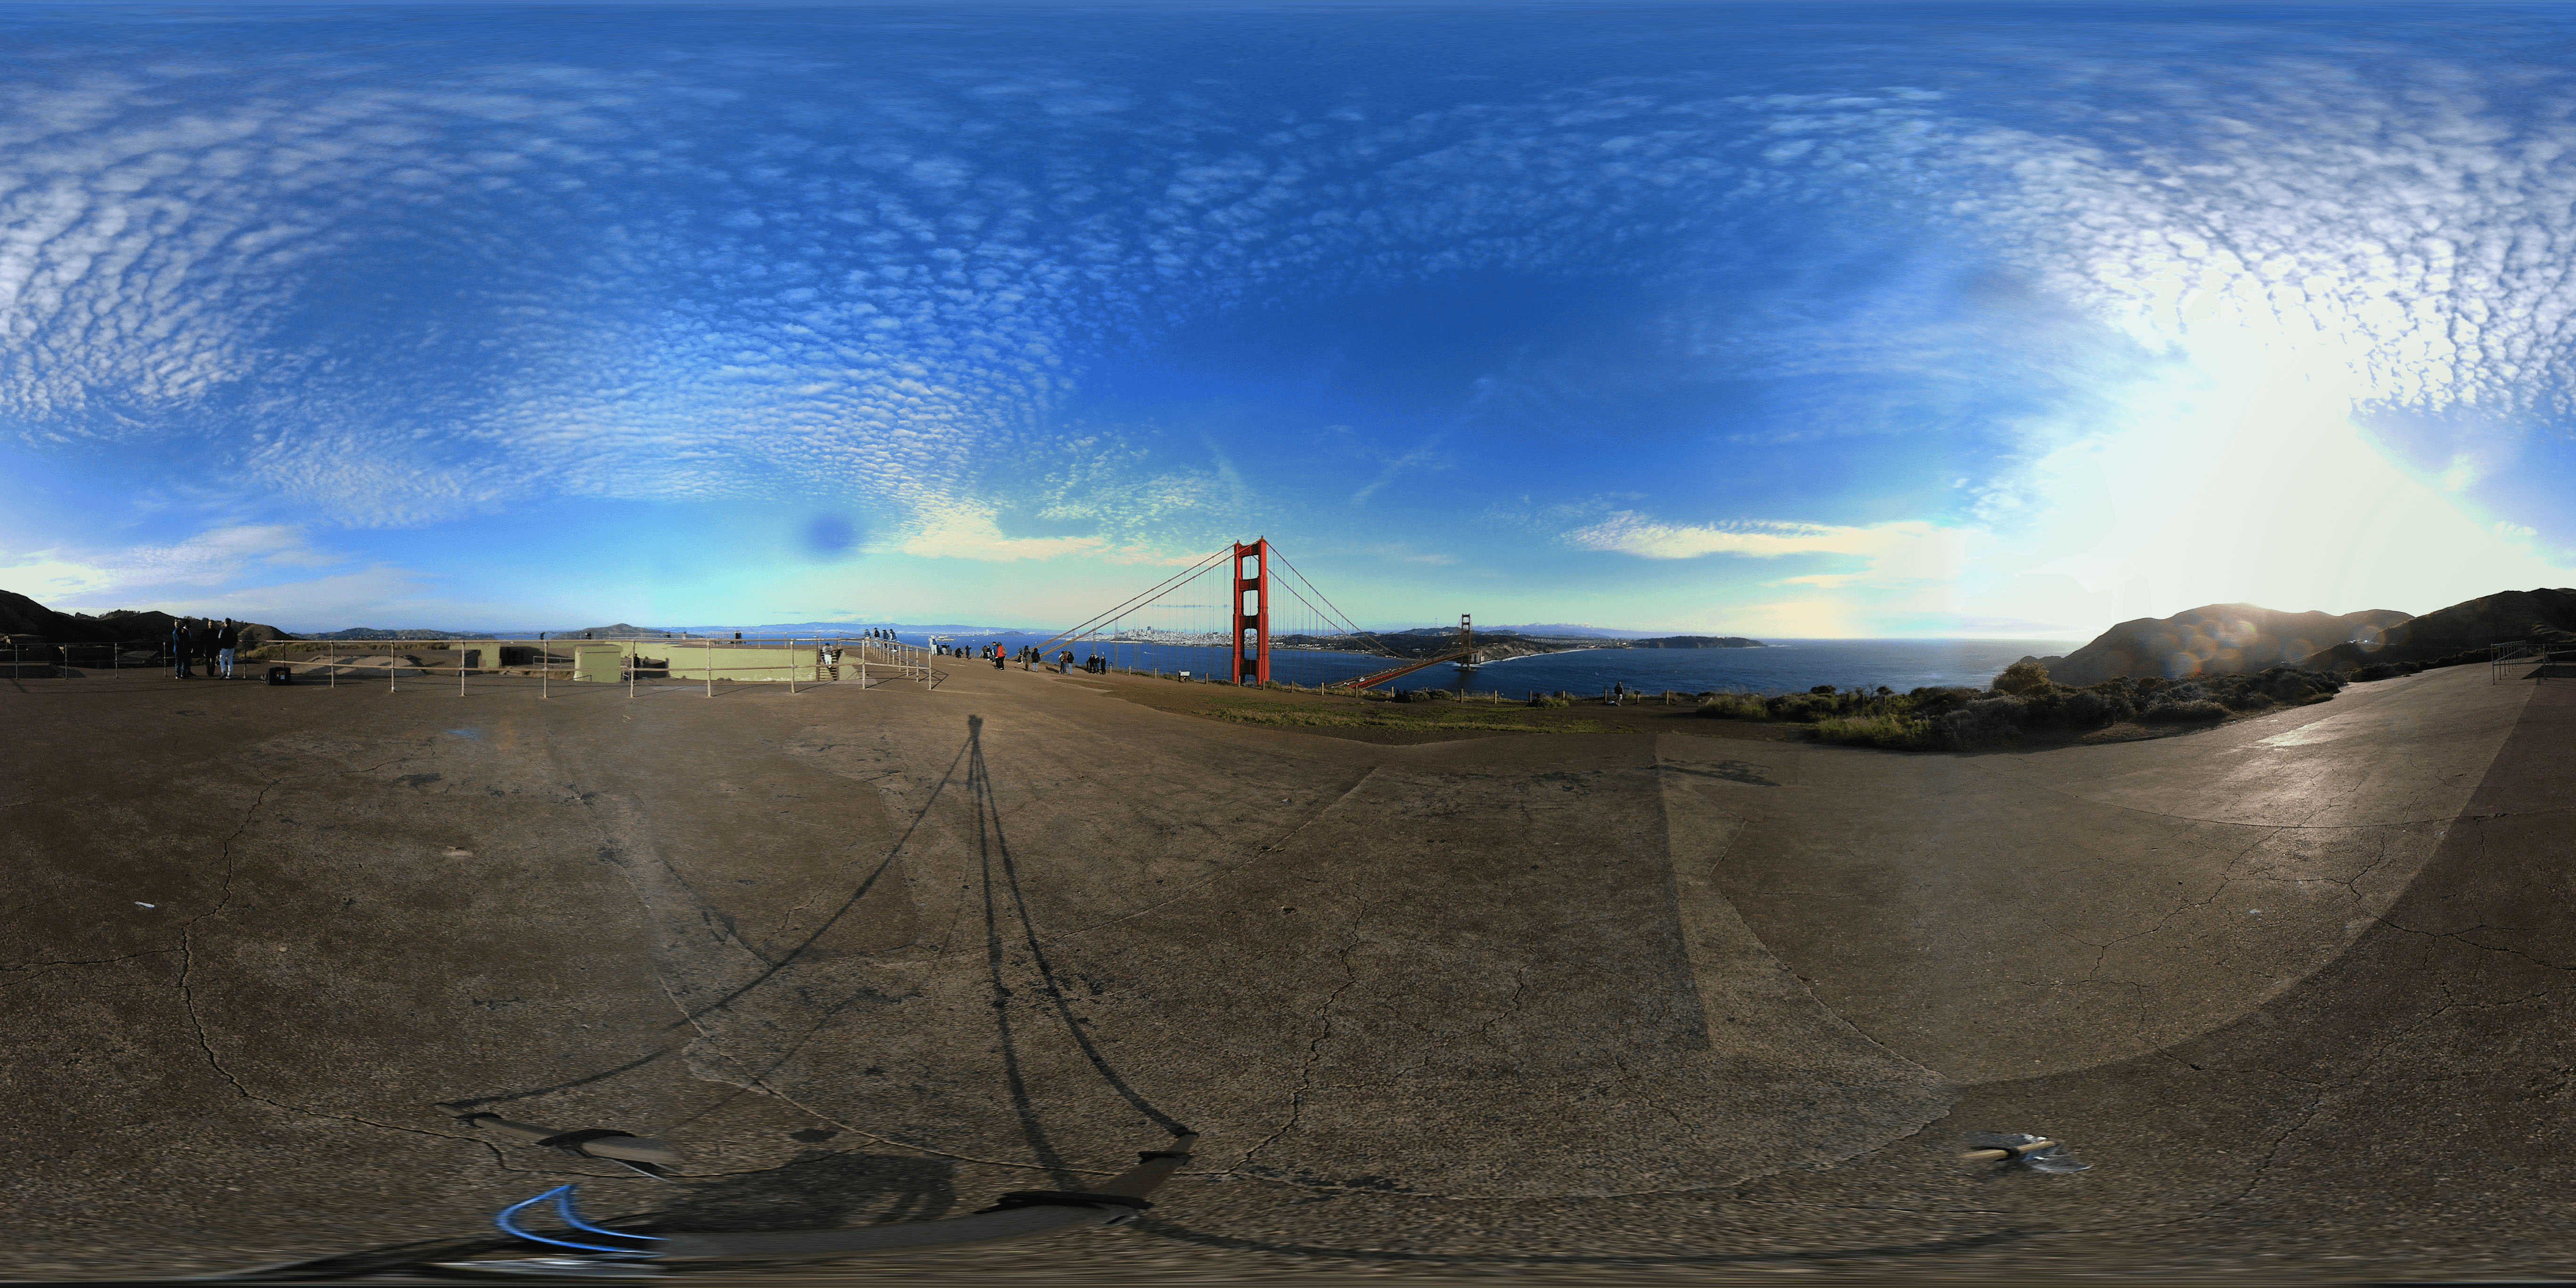 Here is a test image taken from the worlds first virtual reality camera satellite, Overview 1.